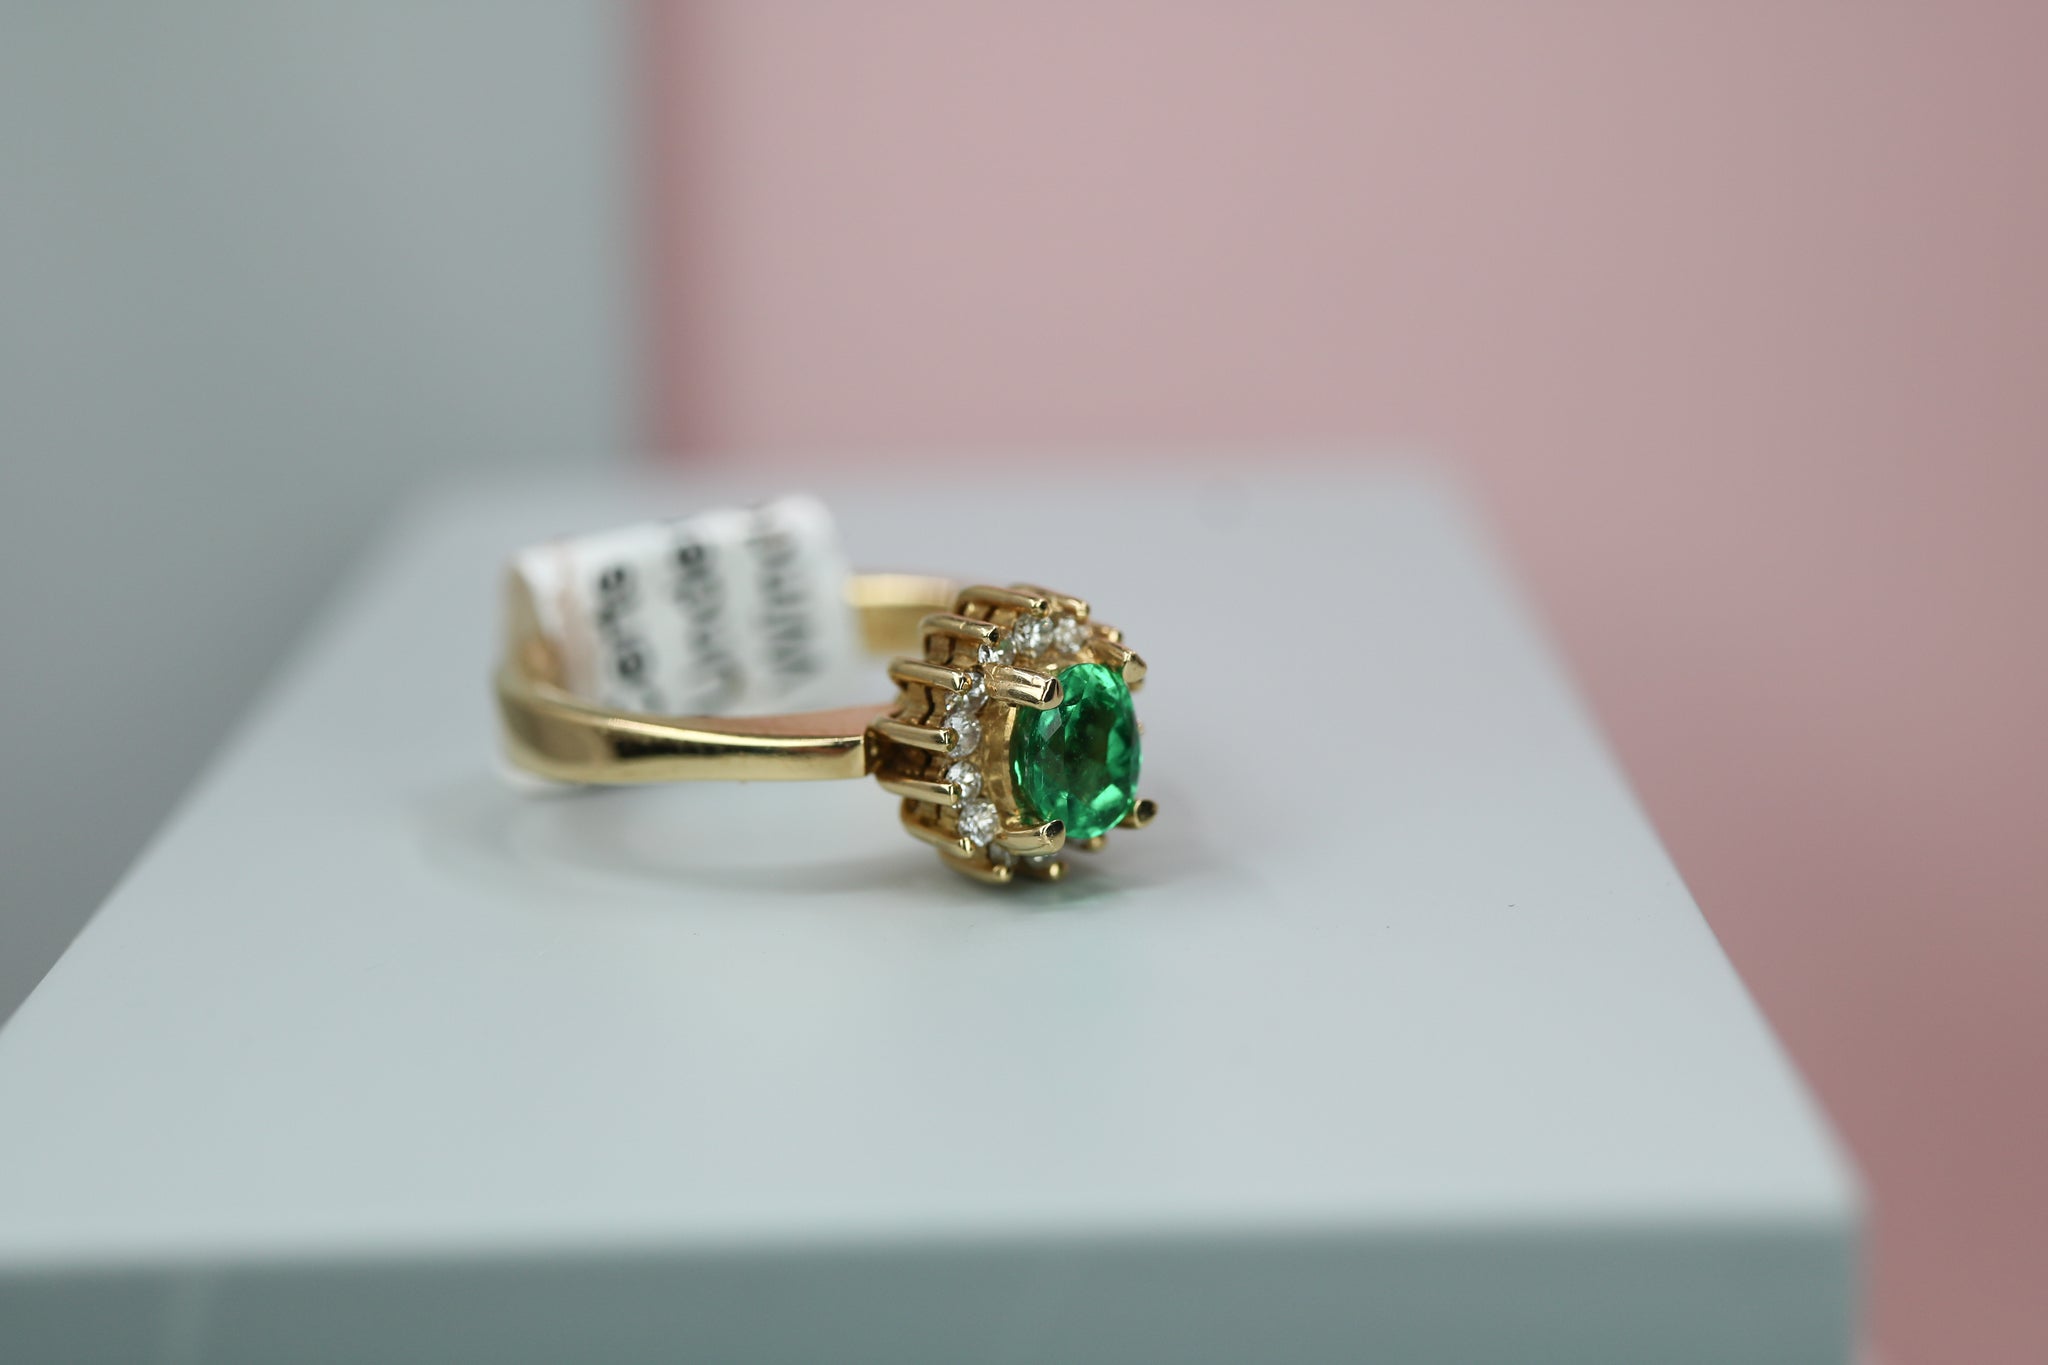 14ct Yellow Gold Emerald & Diamond Ring - HJ2066 - Hallmark Jewellers Formby & The Jewellers Bench Widnes